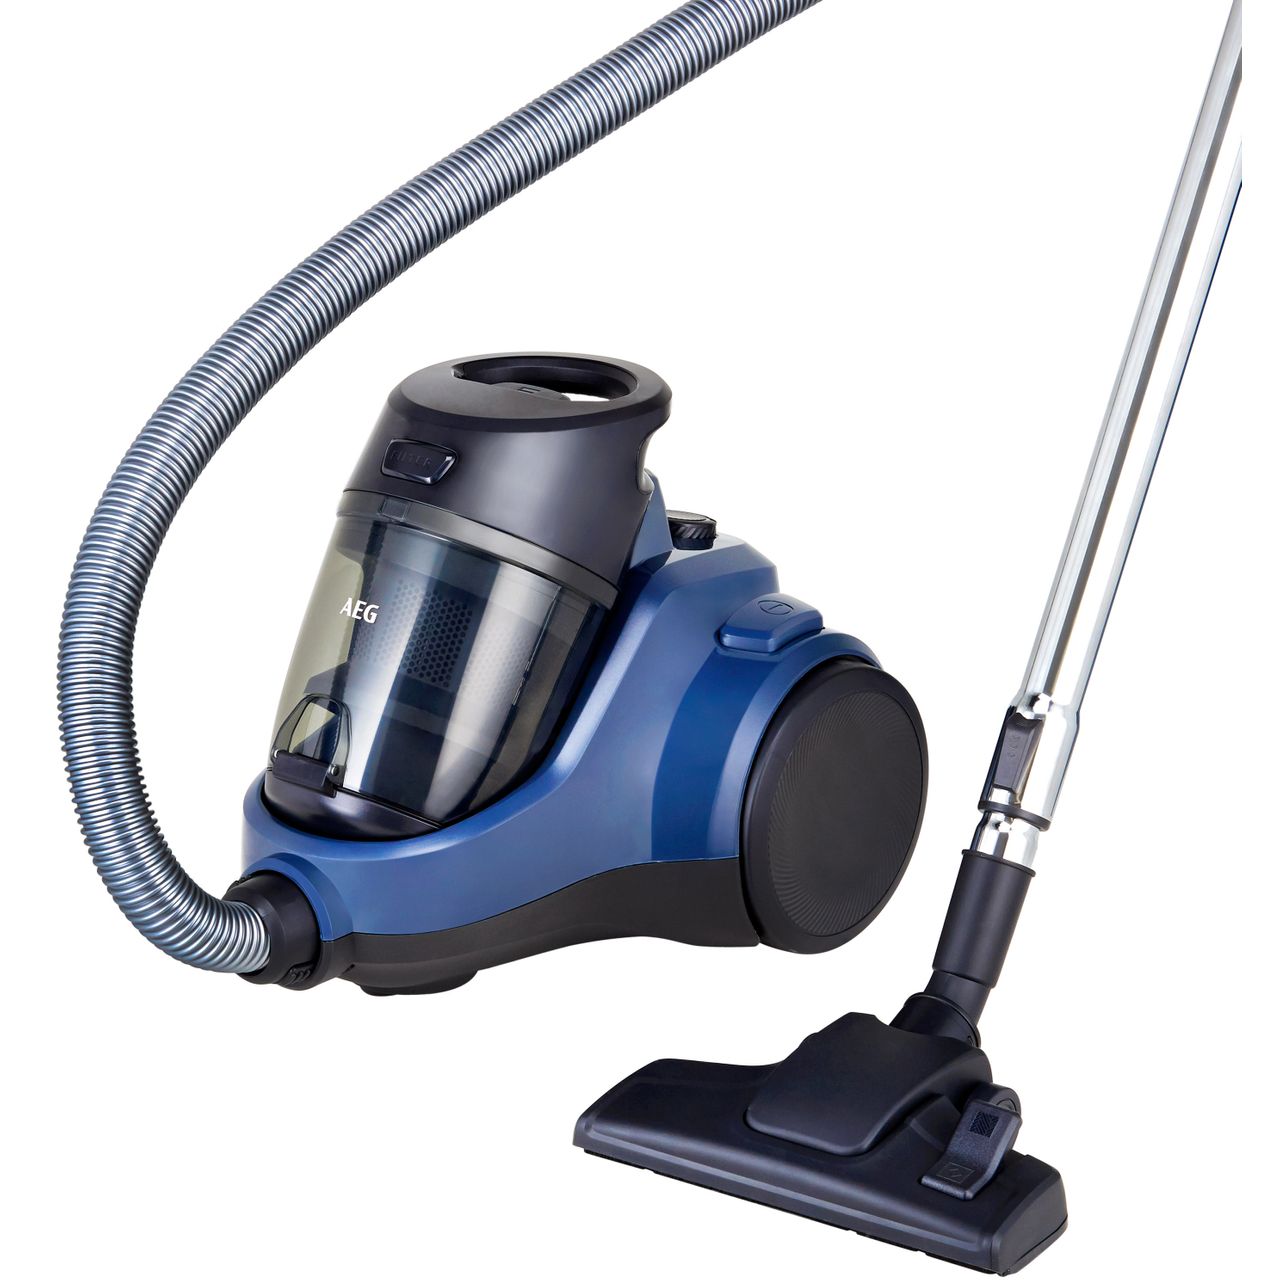 AEG LX5-2-4DB Cylinder Vacuum Cleaner Review